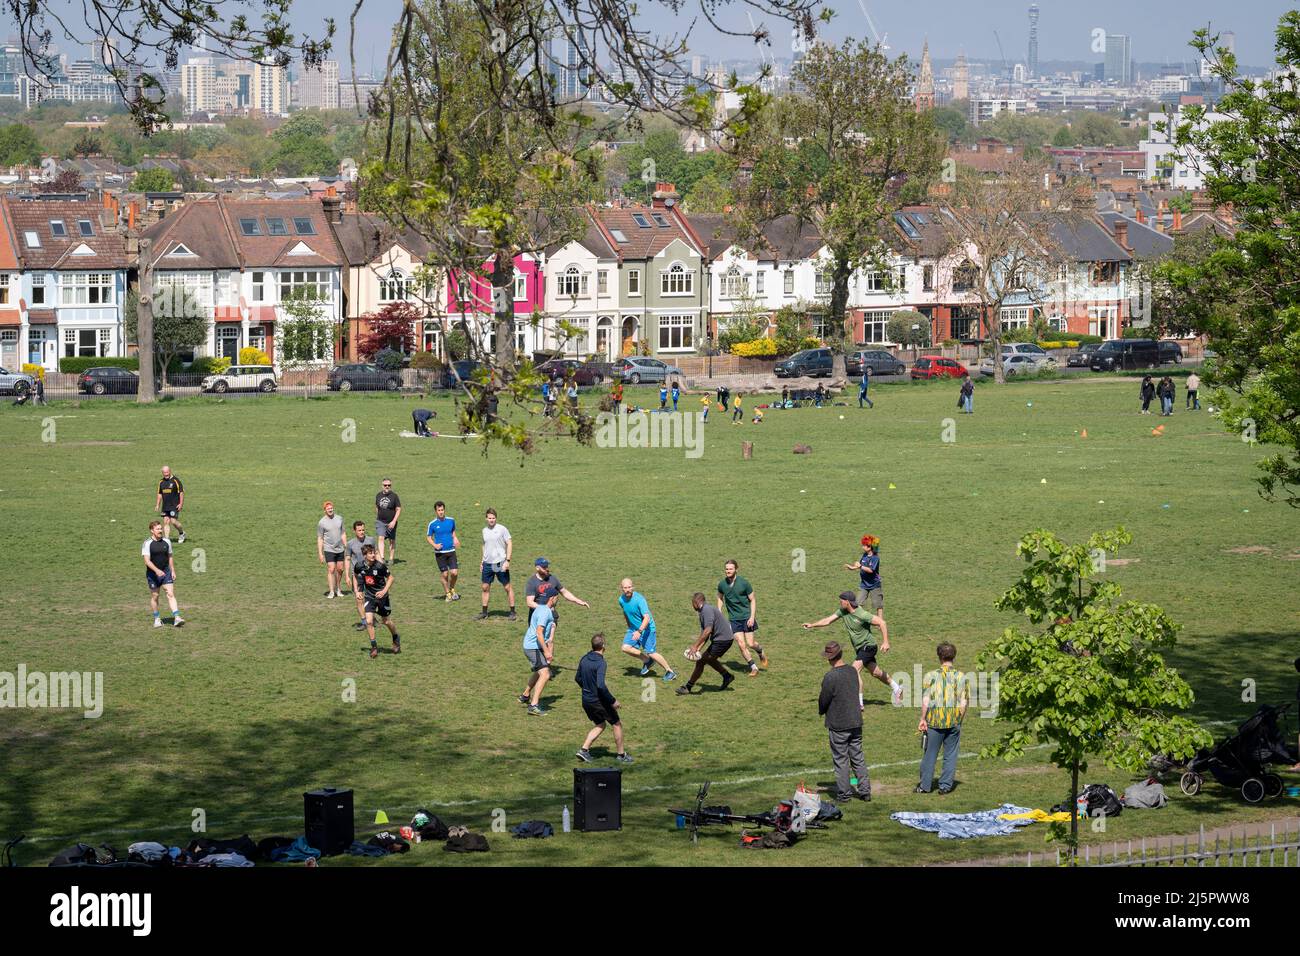 A local game of touch rugby is played in Ruskin Park, a south London green space that overlooks houses in Lambeth, on 24th April 2022, in London, England. Touch rugby is a safer variation of rugby football in which players do not tackle each other but instead touch their opponents using their hands on any part of the body, clothing, or the ball. Stock Photo